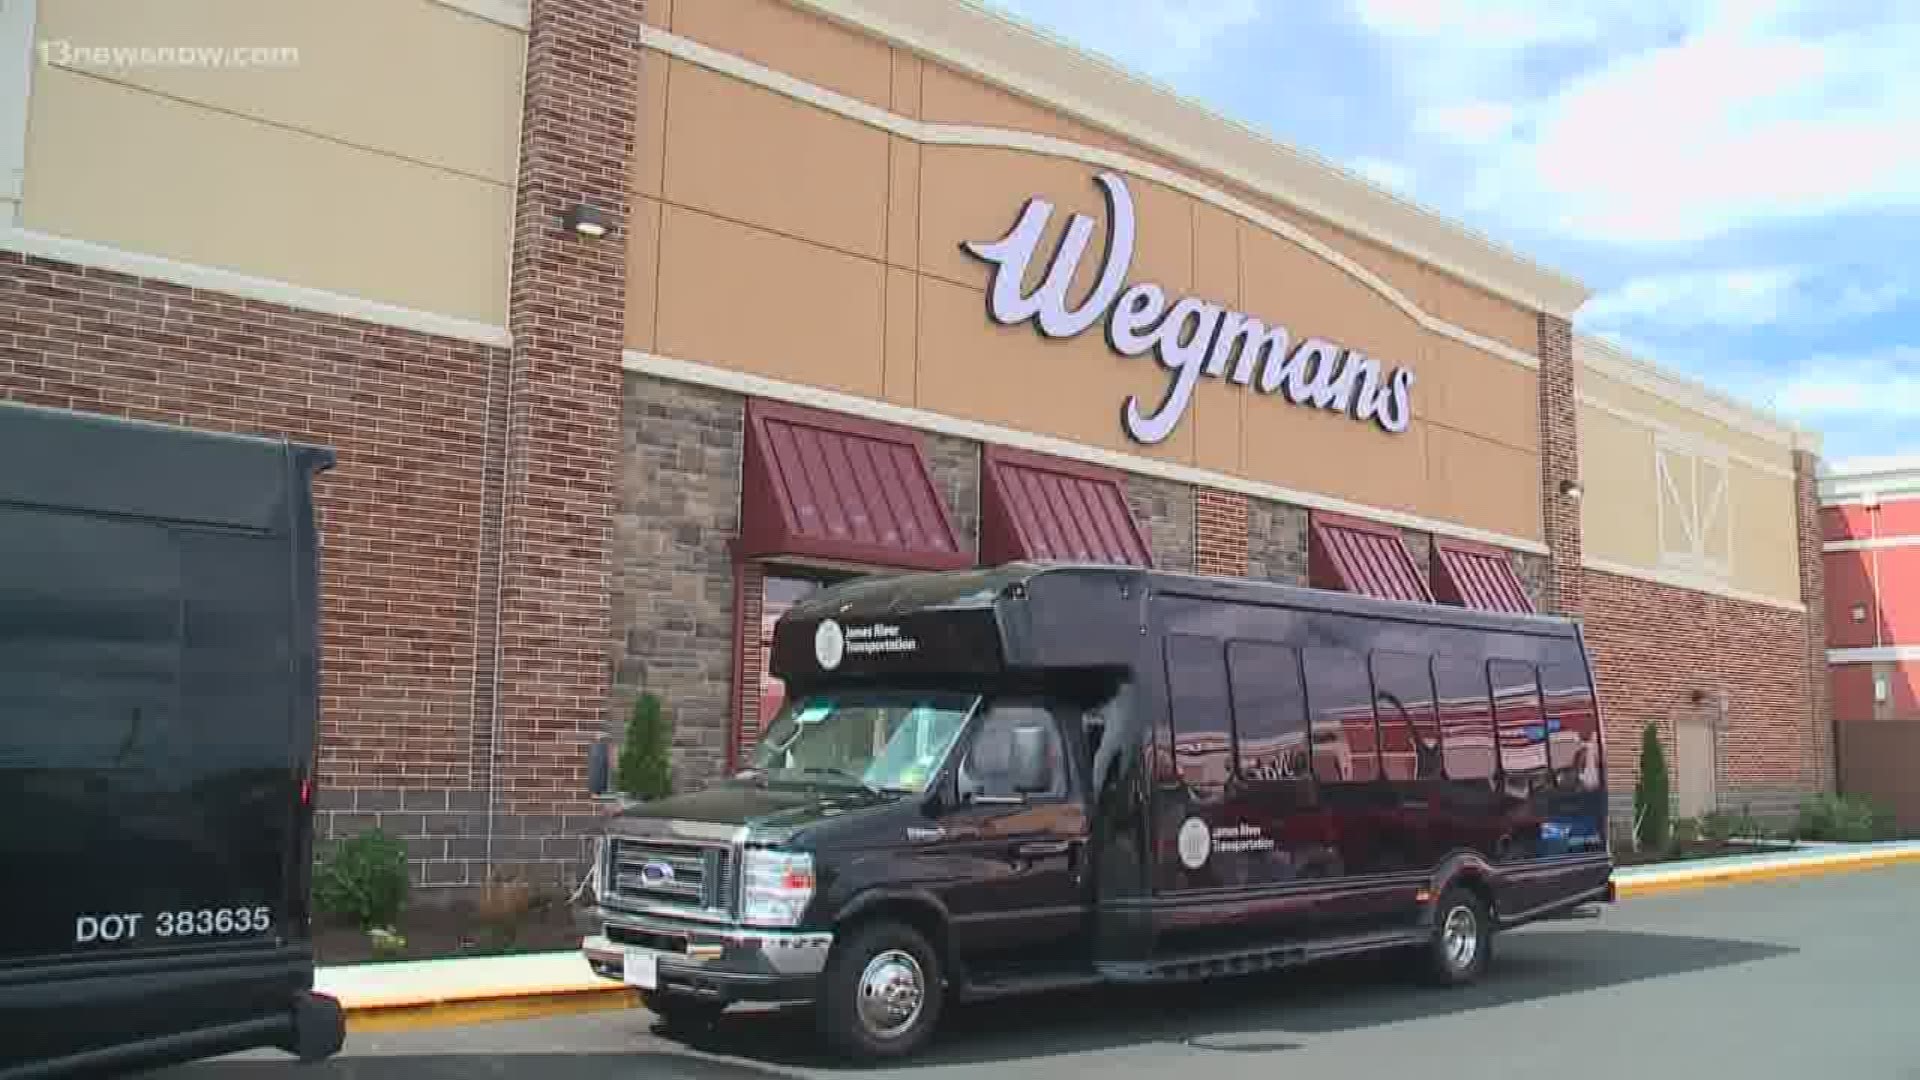 After months of anticipation, Wegmans opened its store in the Town Center area of Virginia Beach. Plenty of people were there to shop on the first day.